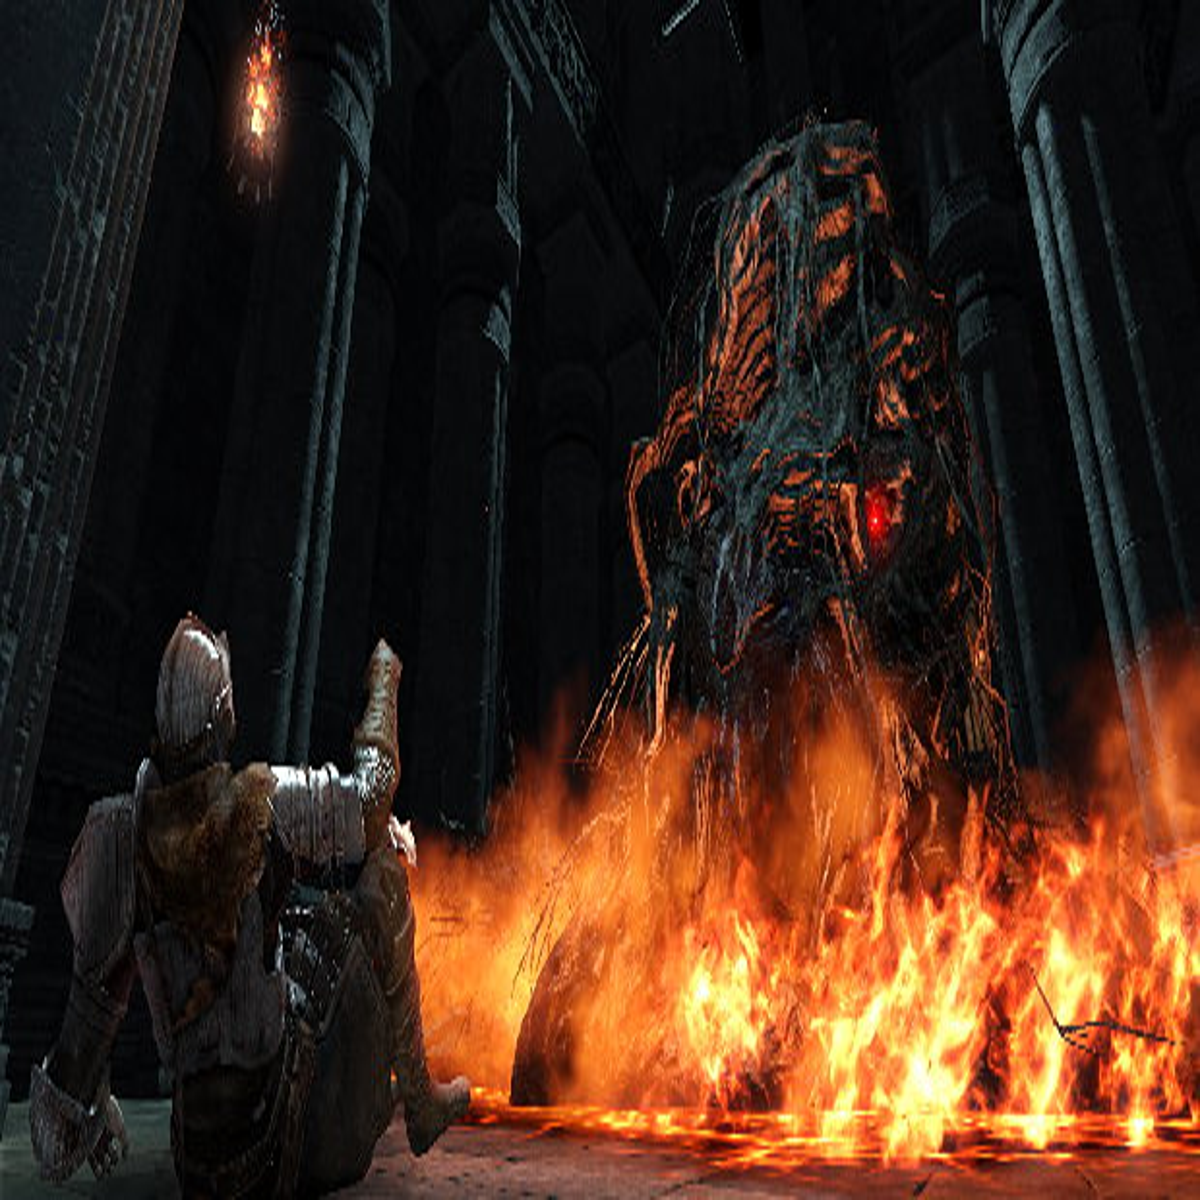 Dark Souls 2's next big update will introduce the Scholar of the First Sin